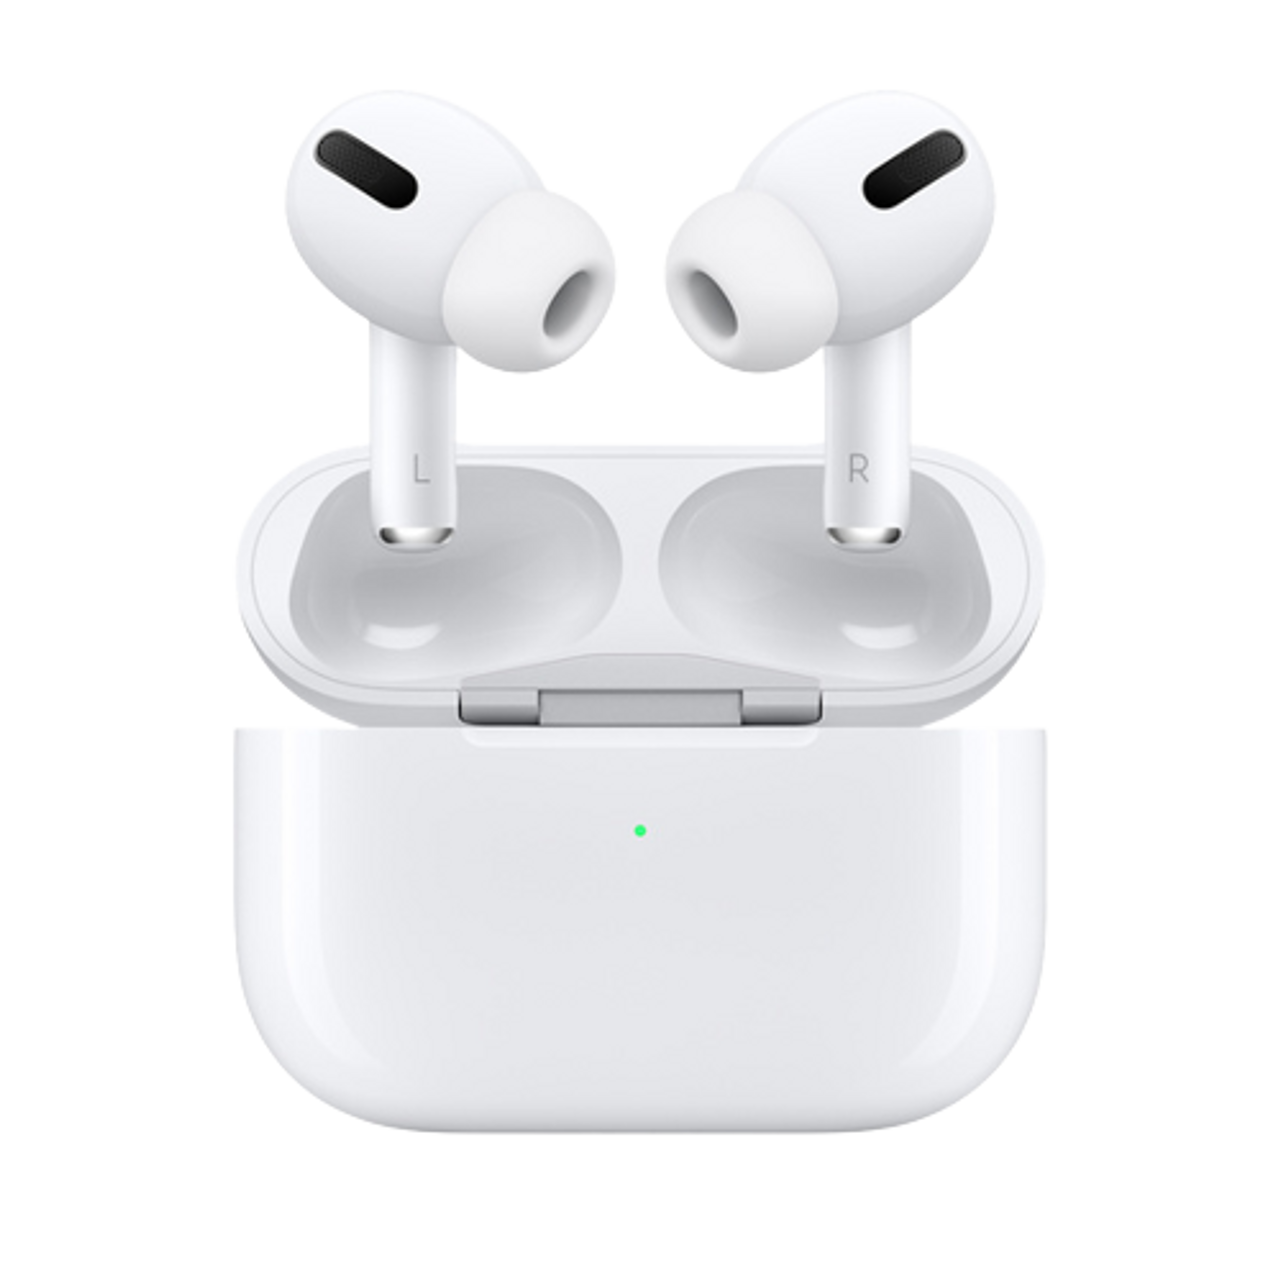 Cornwall Ugle Pengeudlån AirPods Pro High Quality Compatible with iPhone iPads | 30 Day replacement  warranty Free Case